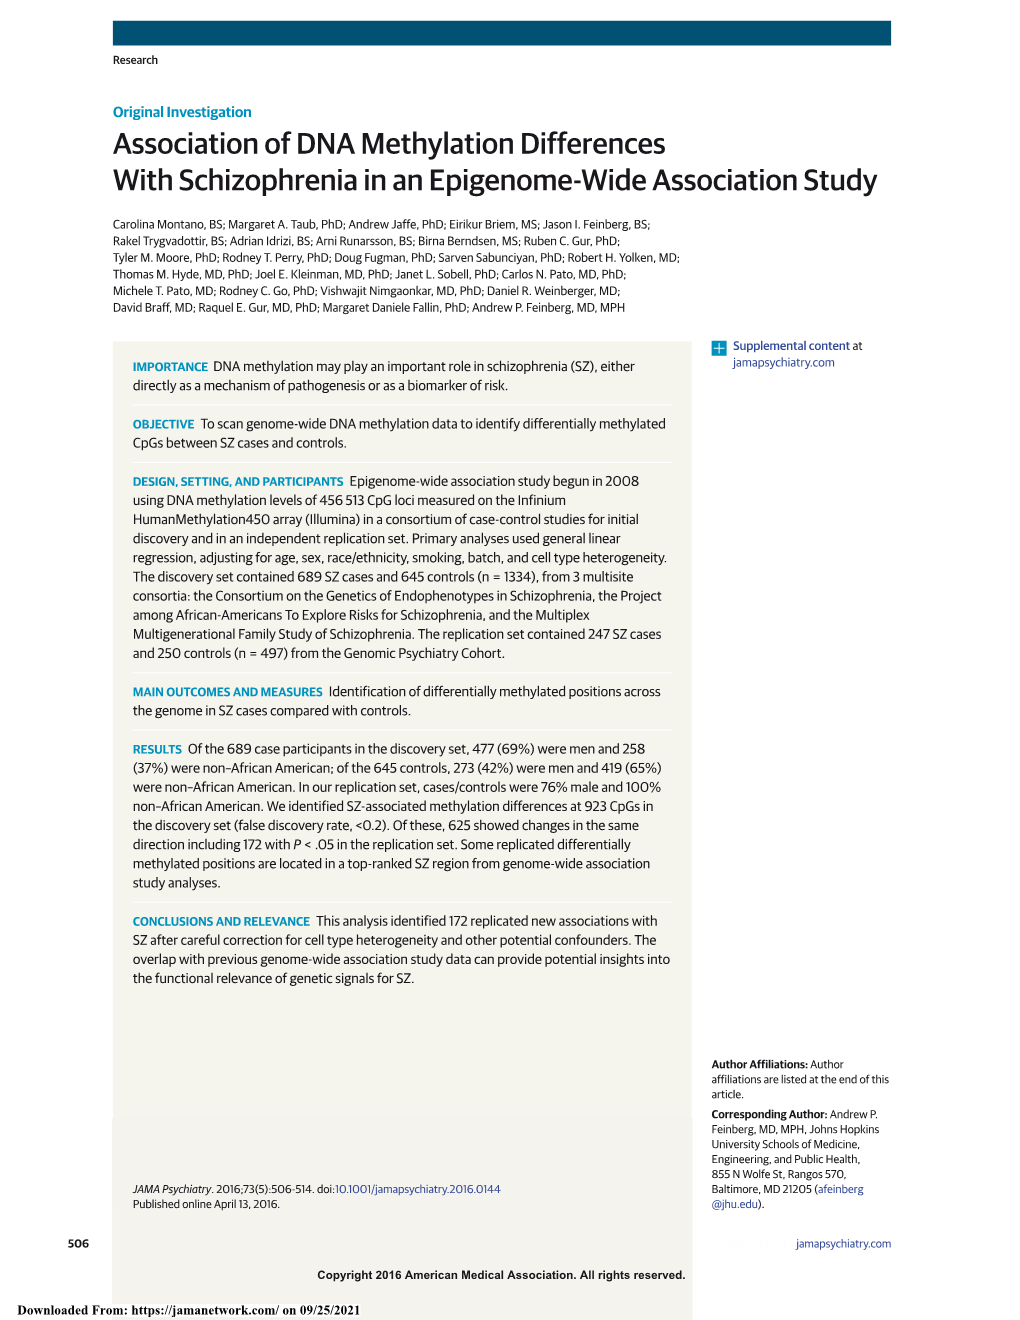 Association of DNA Methylation Differences with Schizophrenia in an Epigenome-Wide Association Study